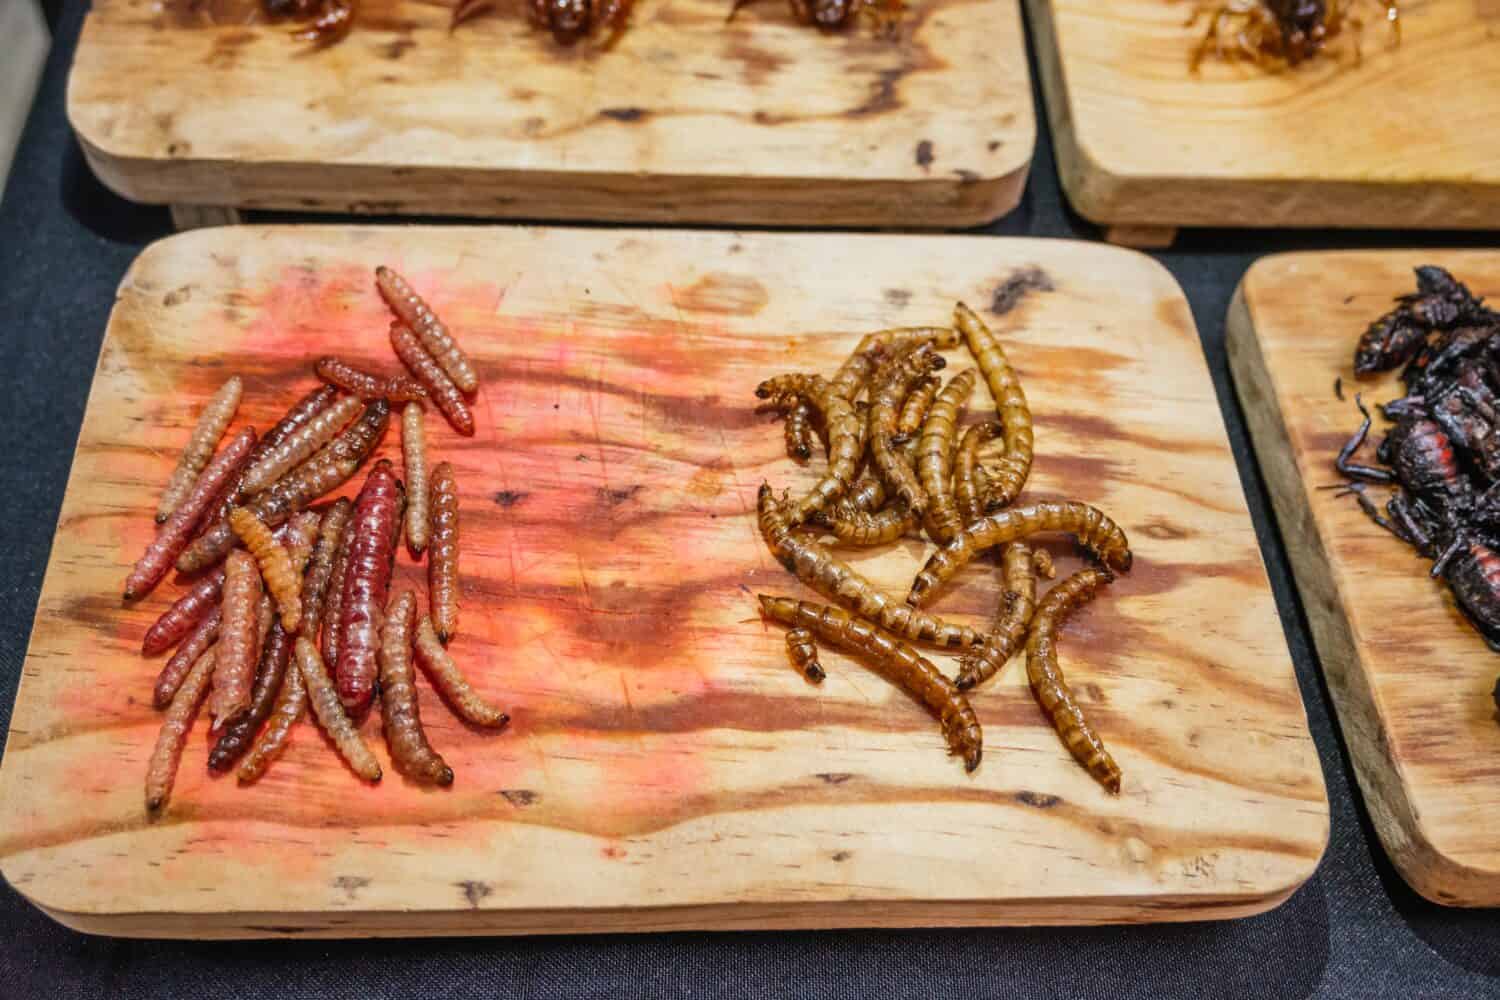 Fried chinicuiles and insects, traditional pre-Hispanic Mexican food, served on a wooden board.